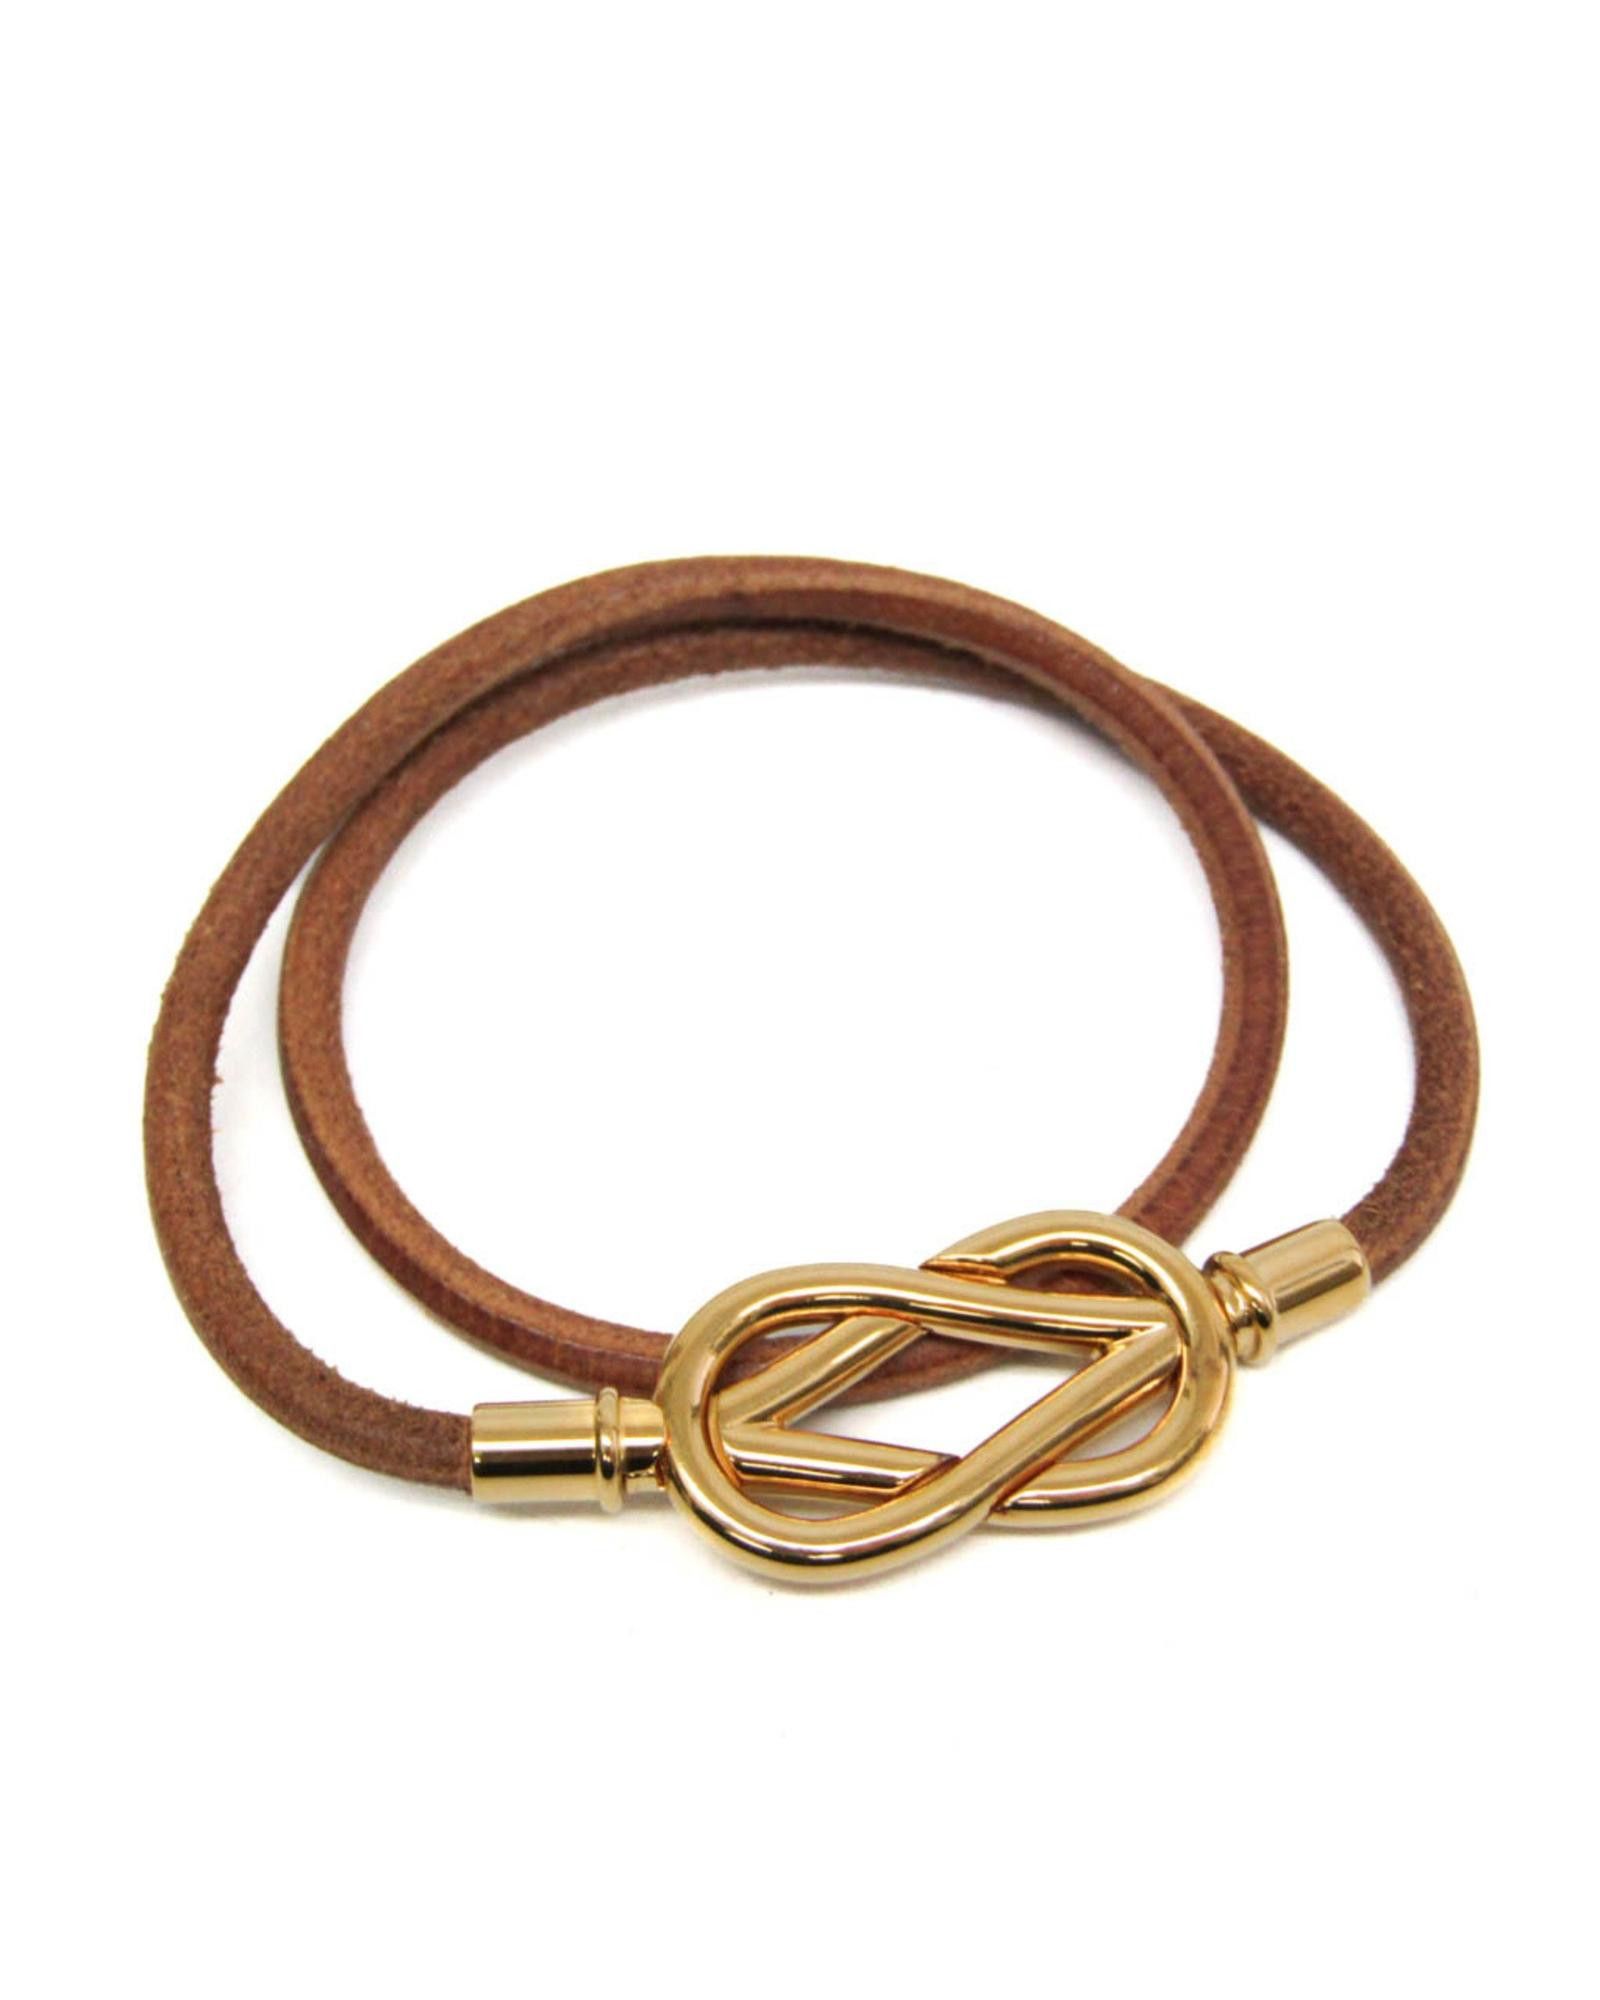 image of Hermes Leather And Metal Brown Choker With Bangle Design, Women's